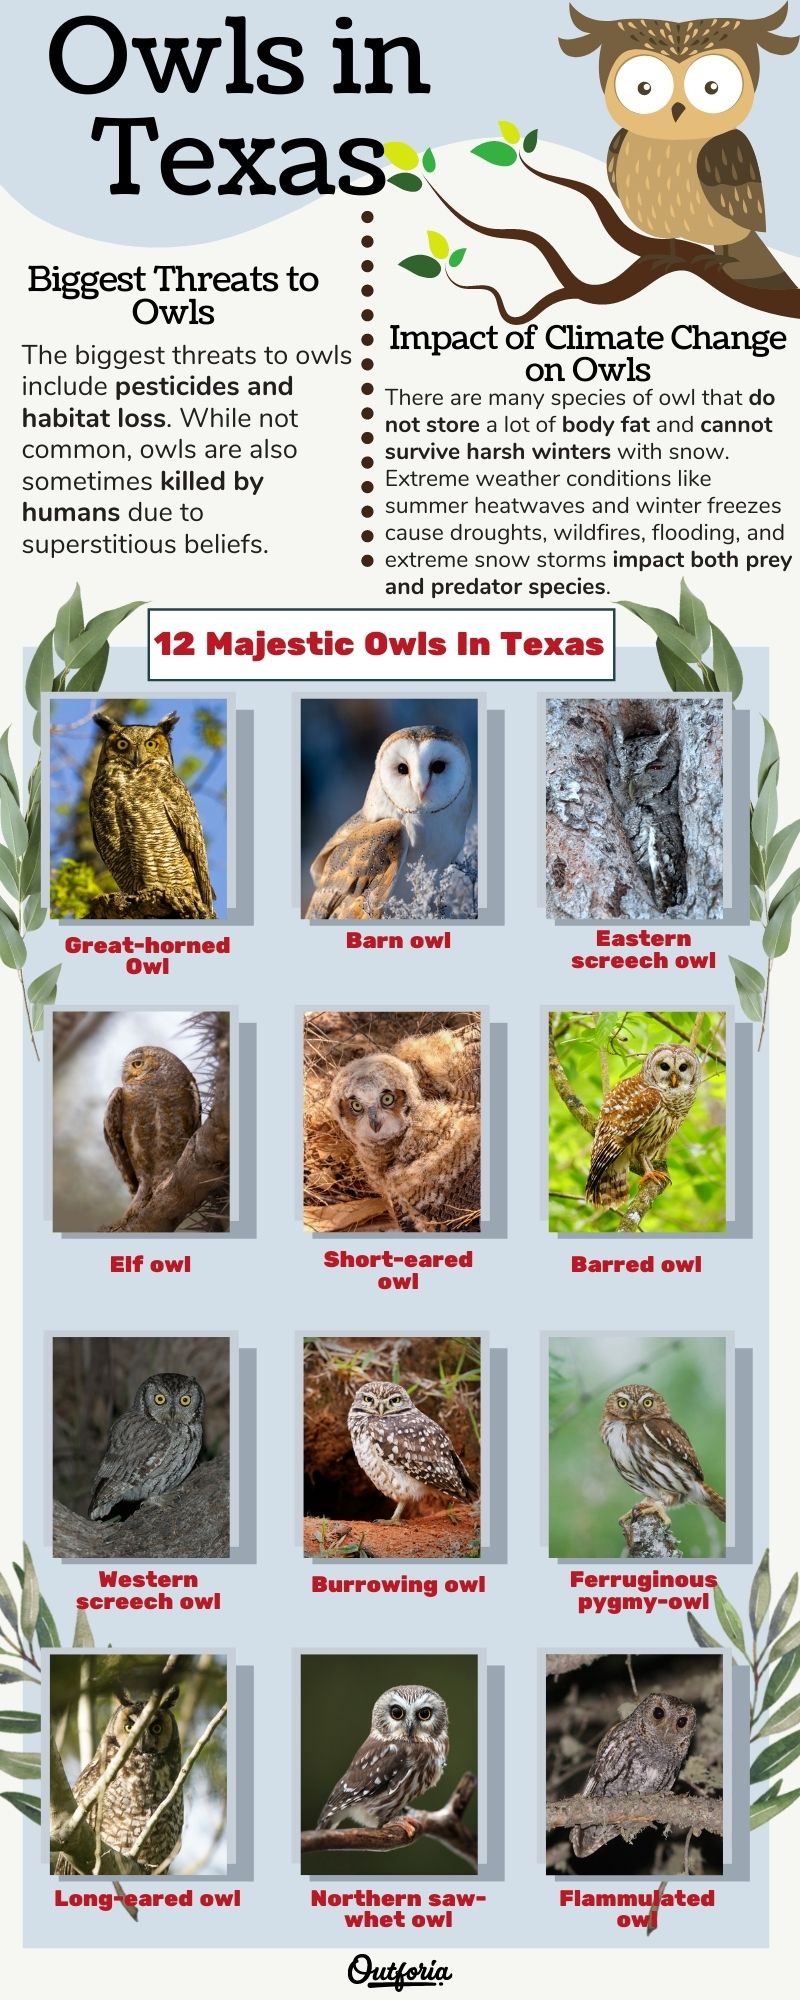 Chart of Owls in Texas complete with facts, photos, and more